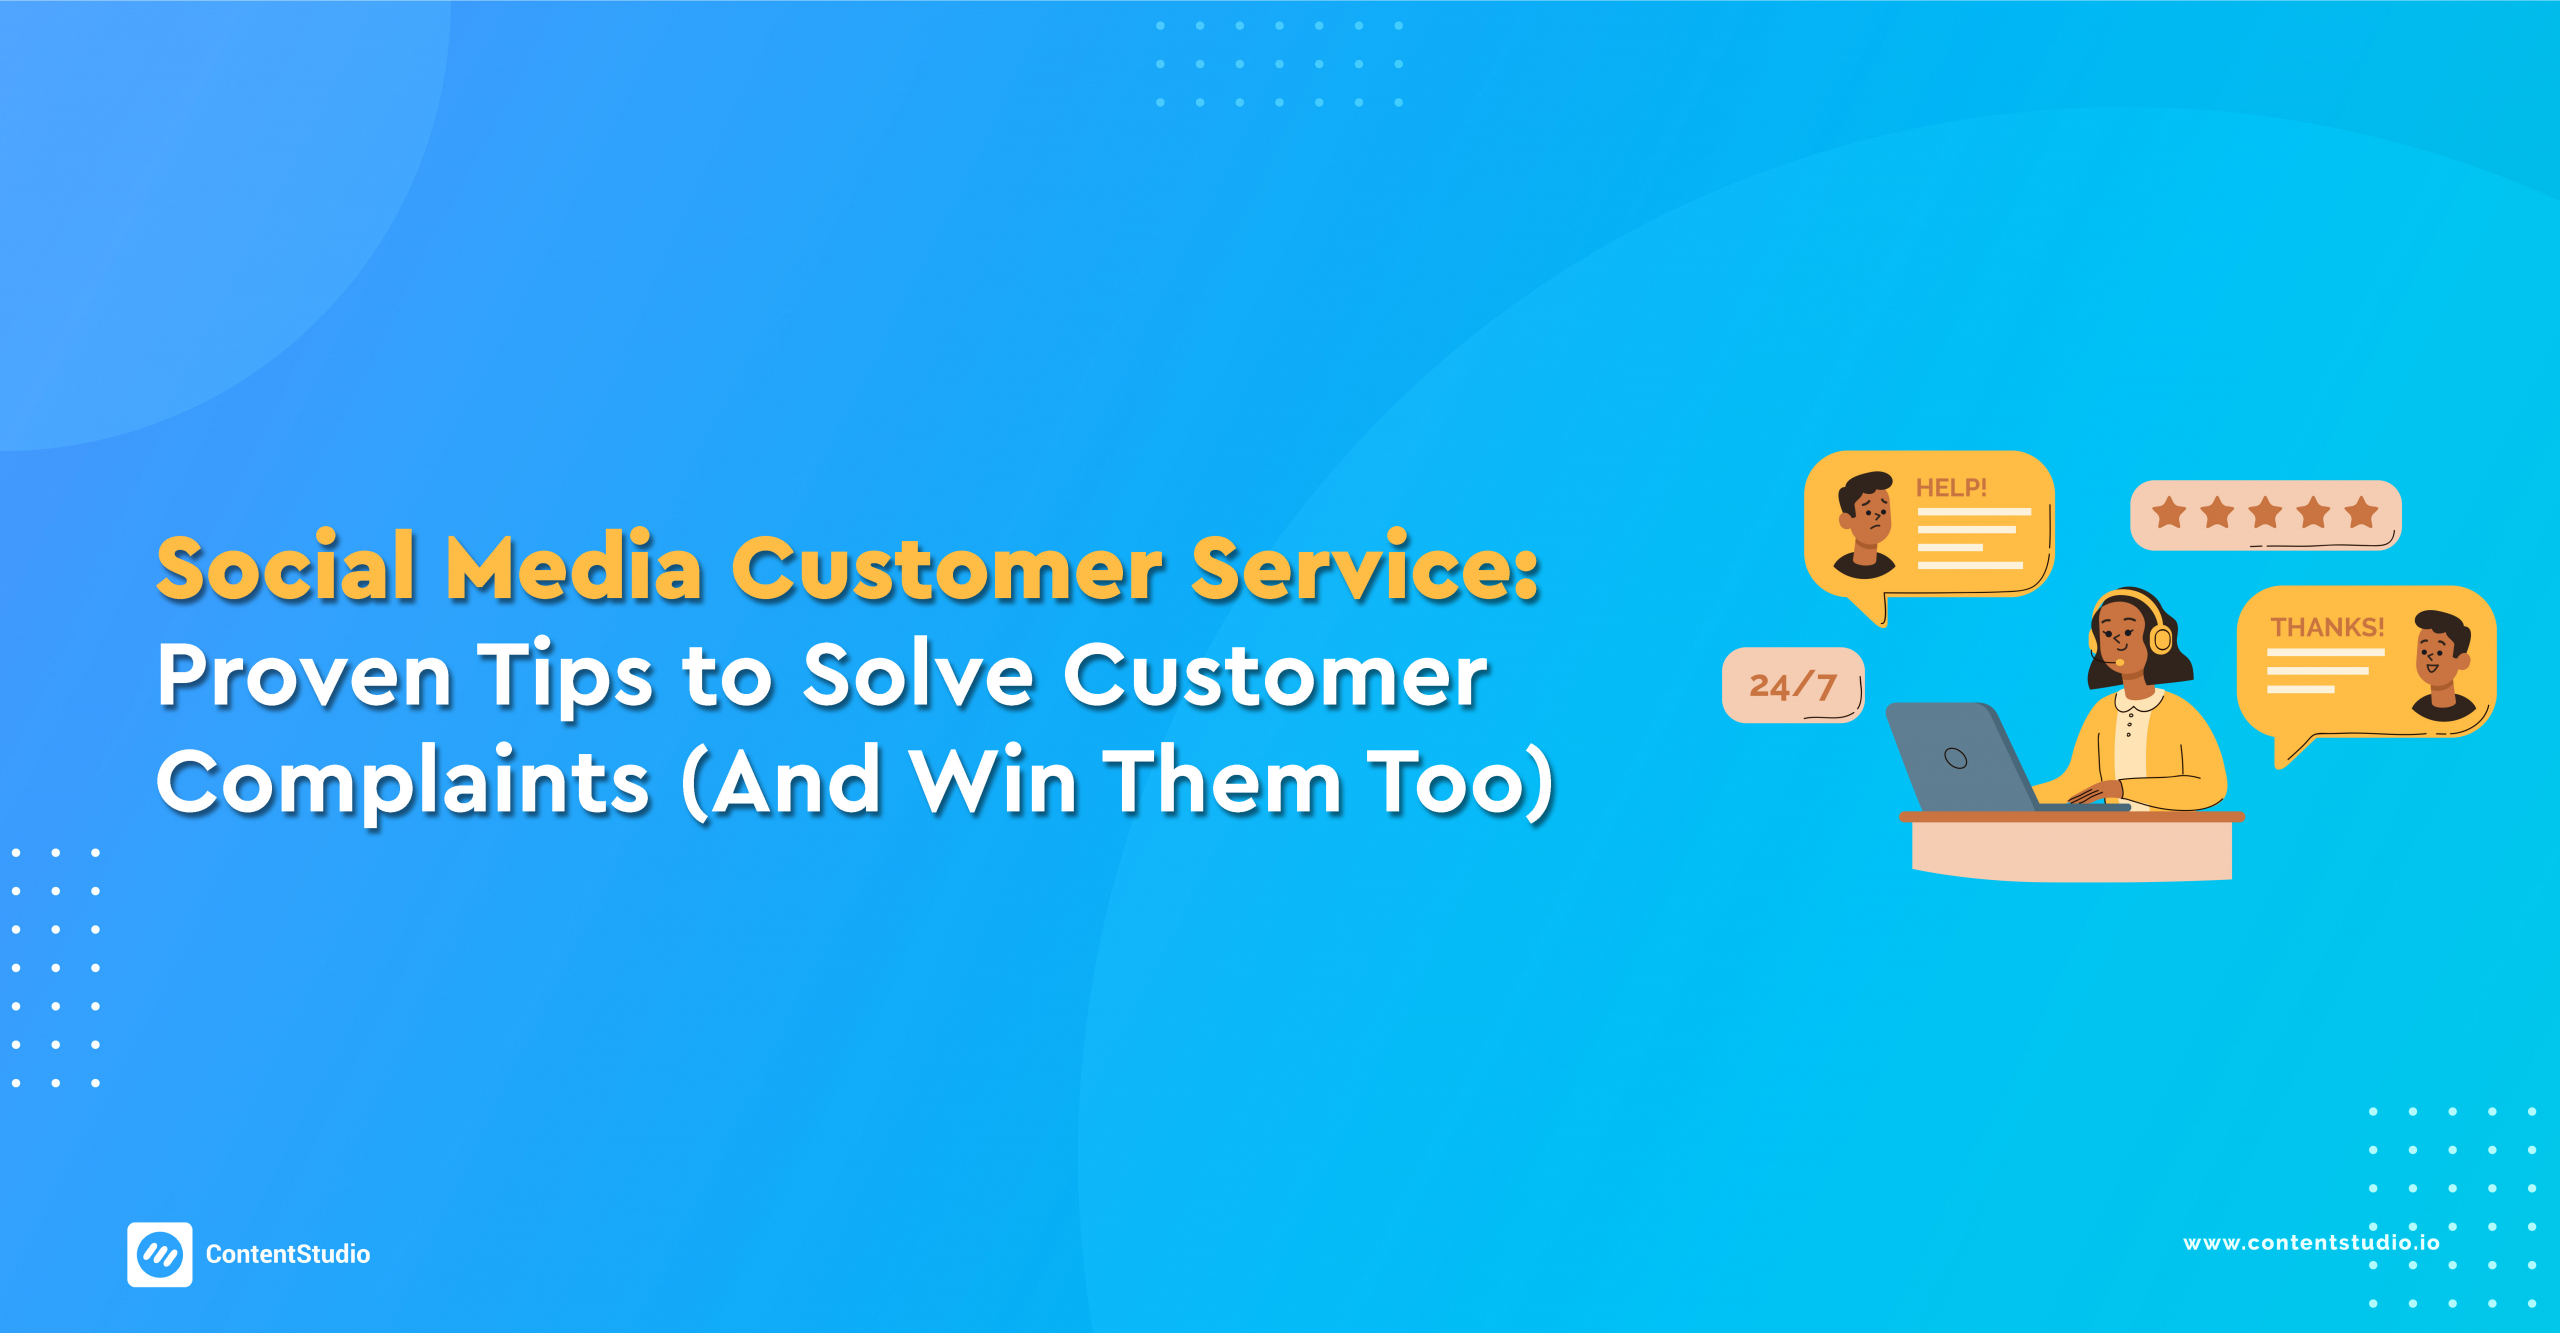 Social Media Customer Service: Proven Tips to Solve Customer Complaints (And Win Them Too) 